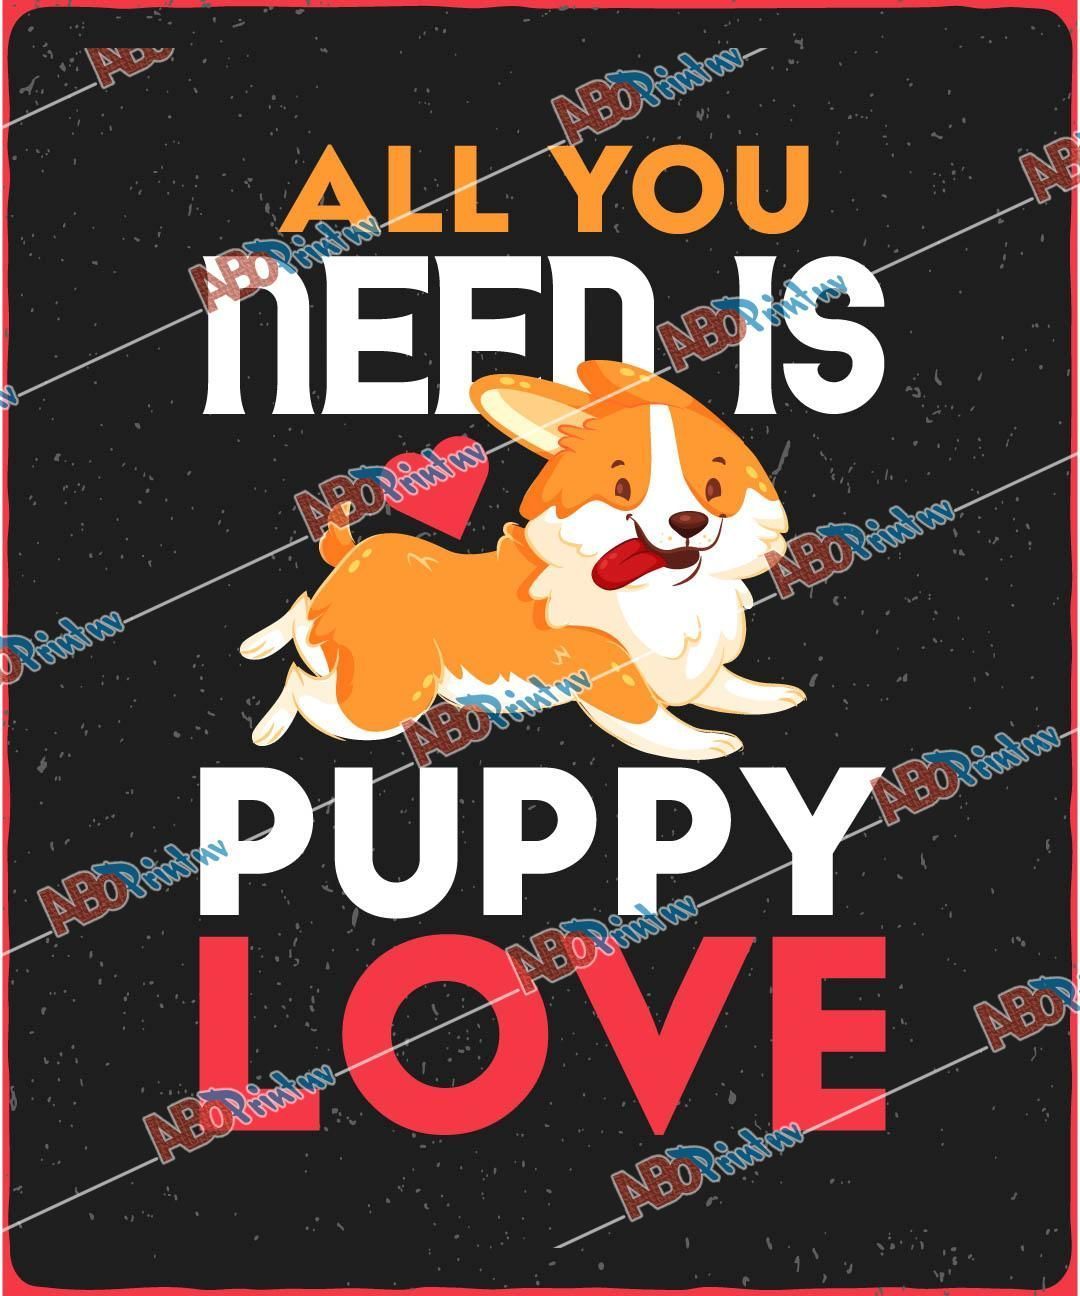 All you need is puppy loveJPG (1).jpg